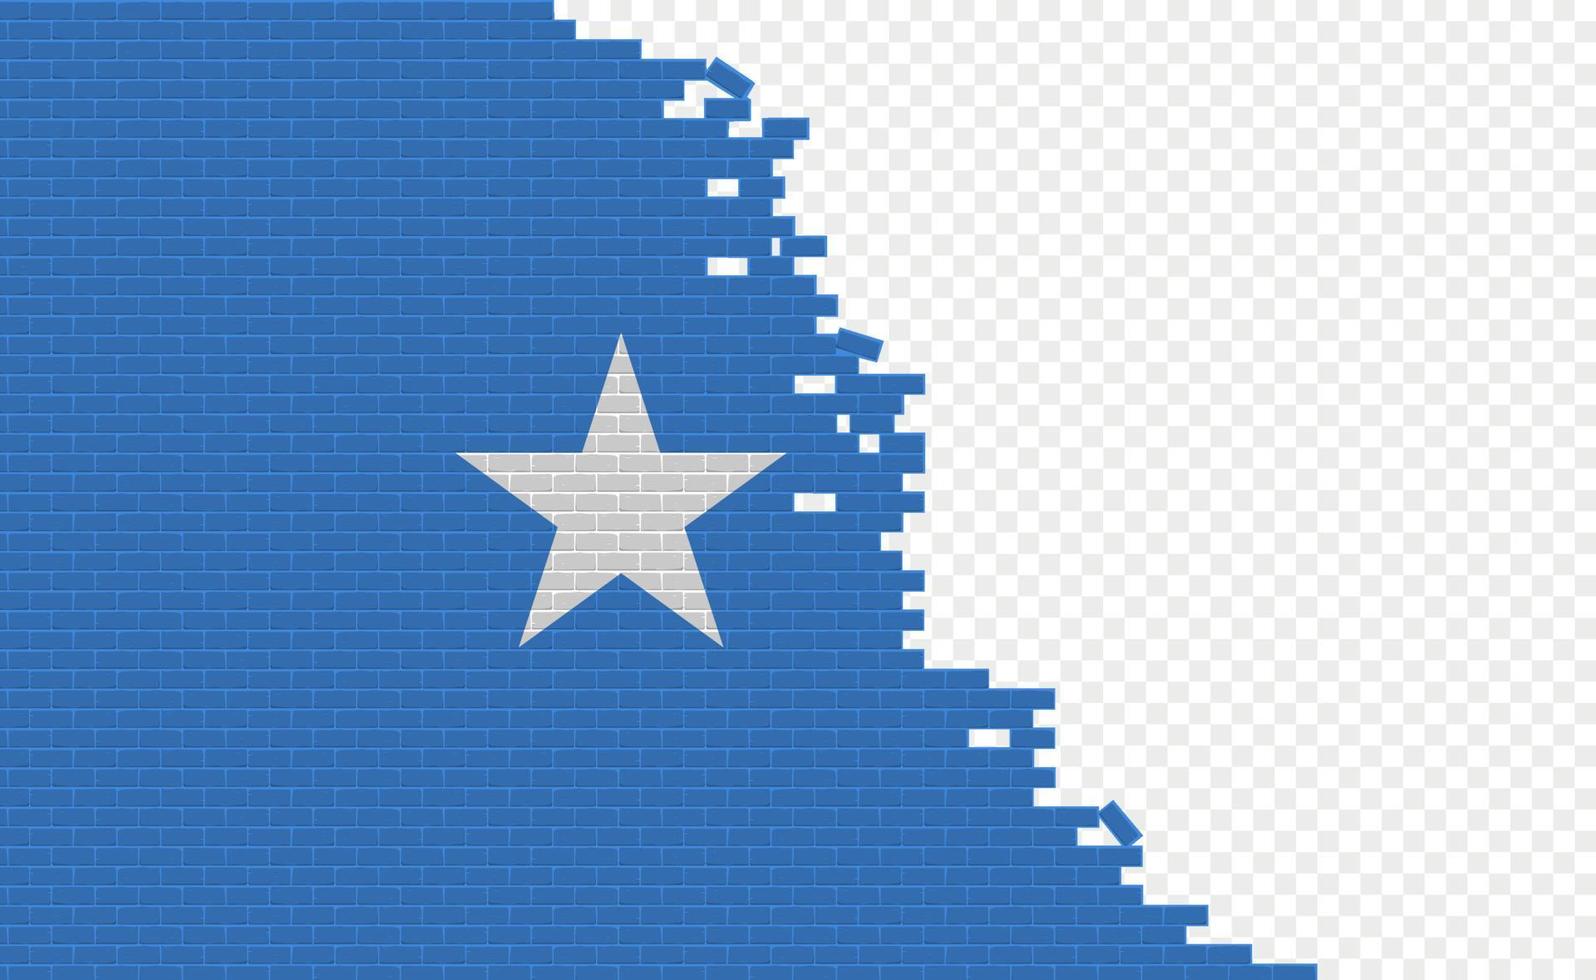 Somalia flag on broken brick wall. Empty flag field of another country. Country comparison. Easy editing and vector in groups.